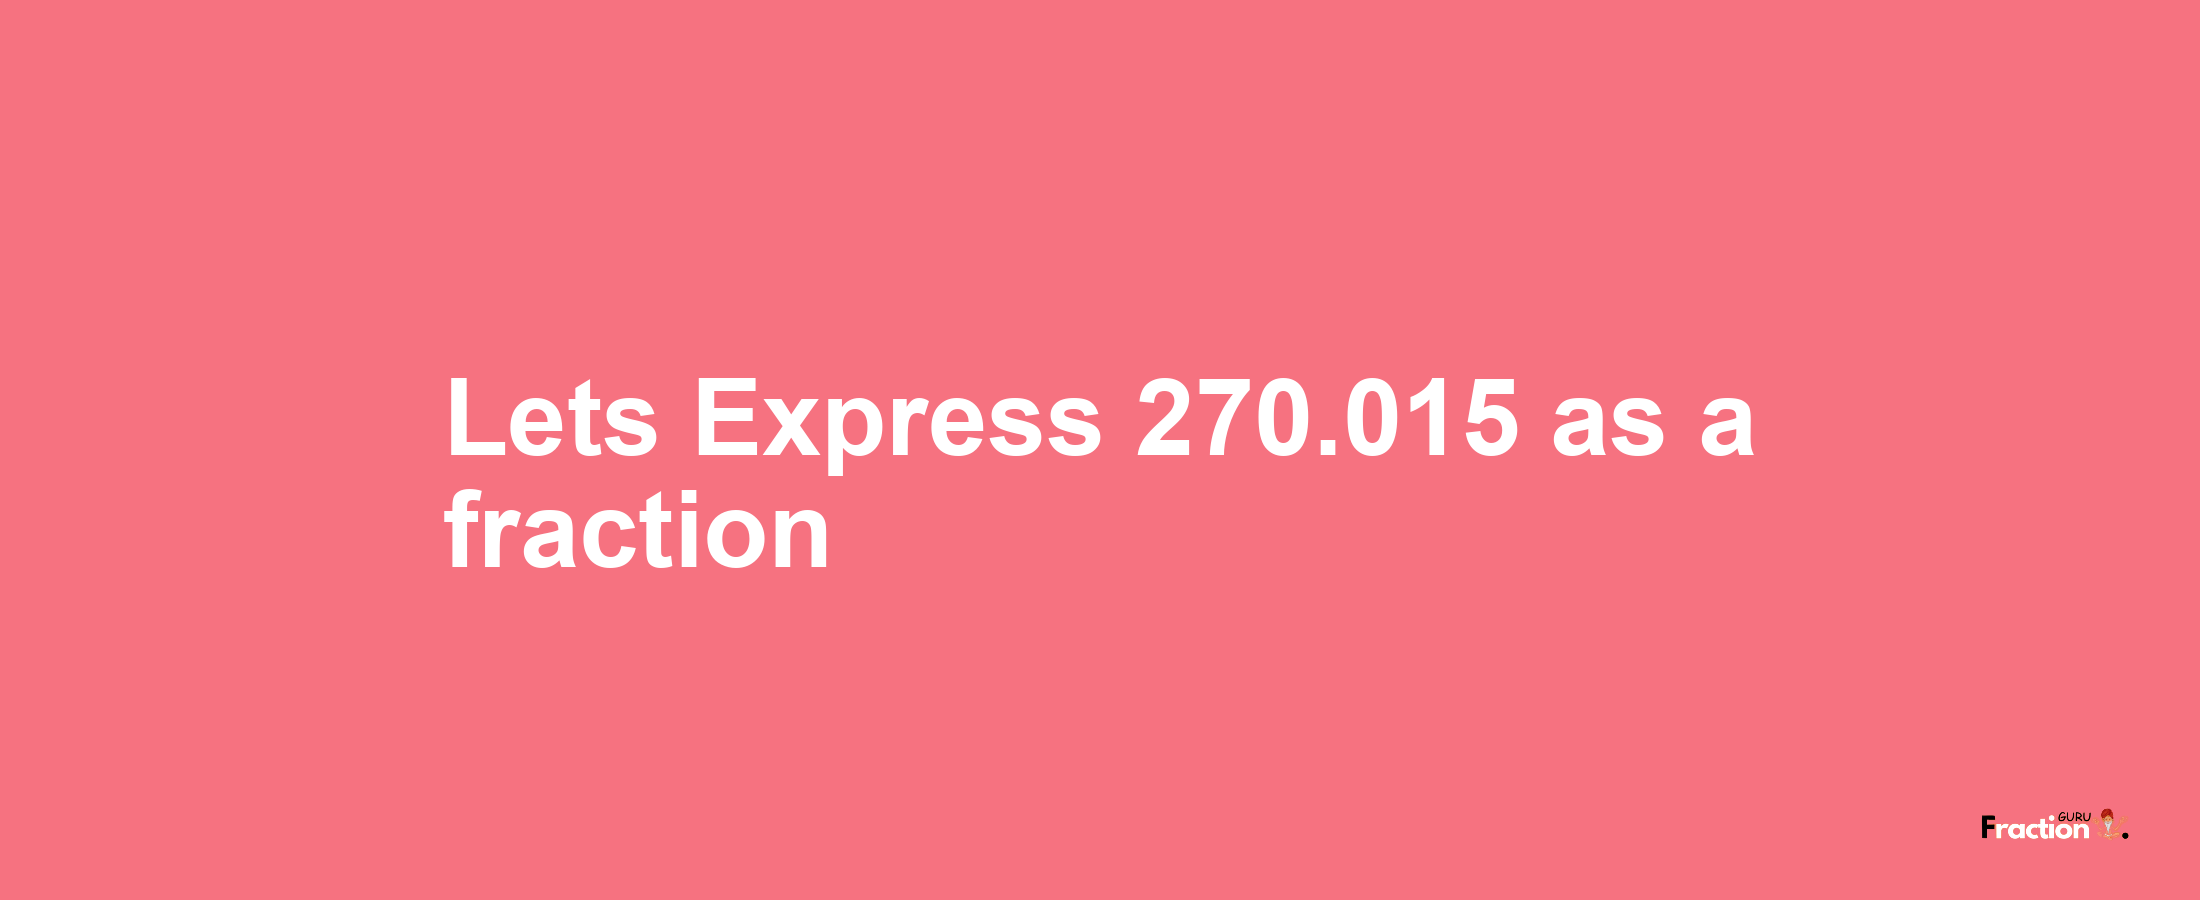 Lets Express 270.015 as afraction